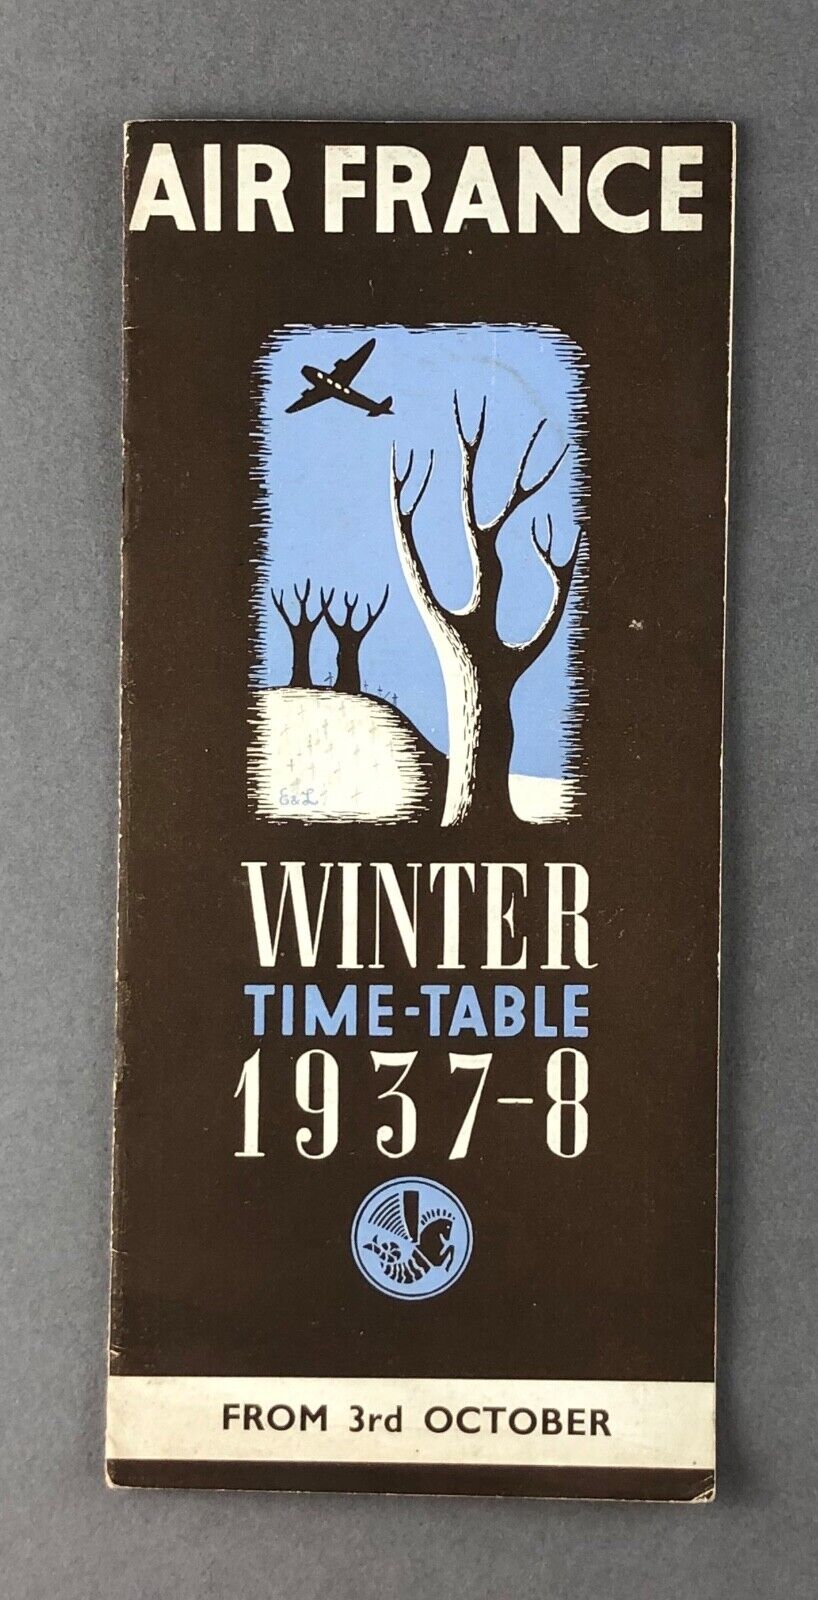 AIR FRANCE AIRLINE TIMETABLE WINTER 1937/38 